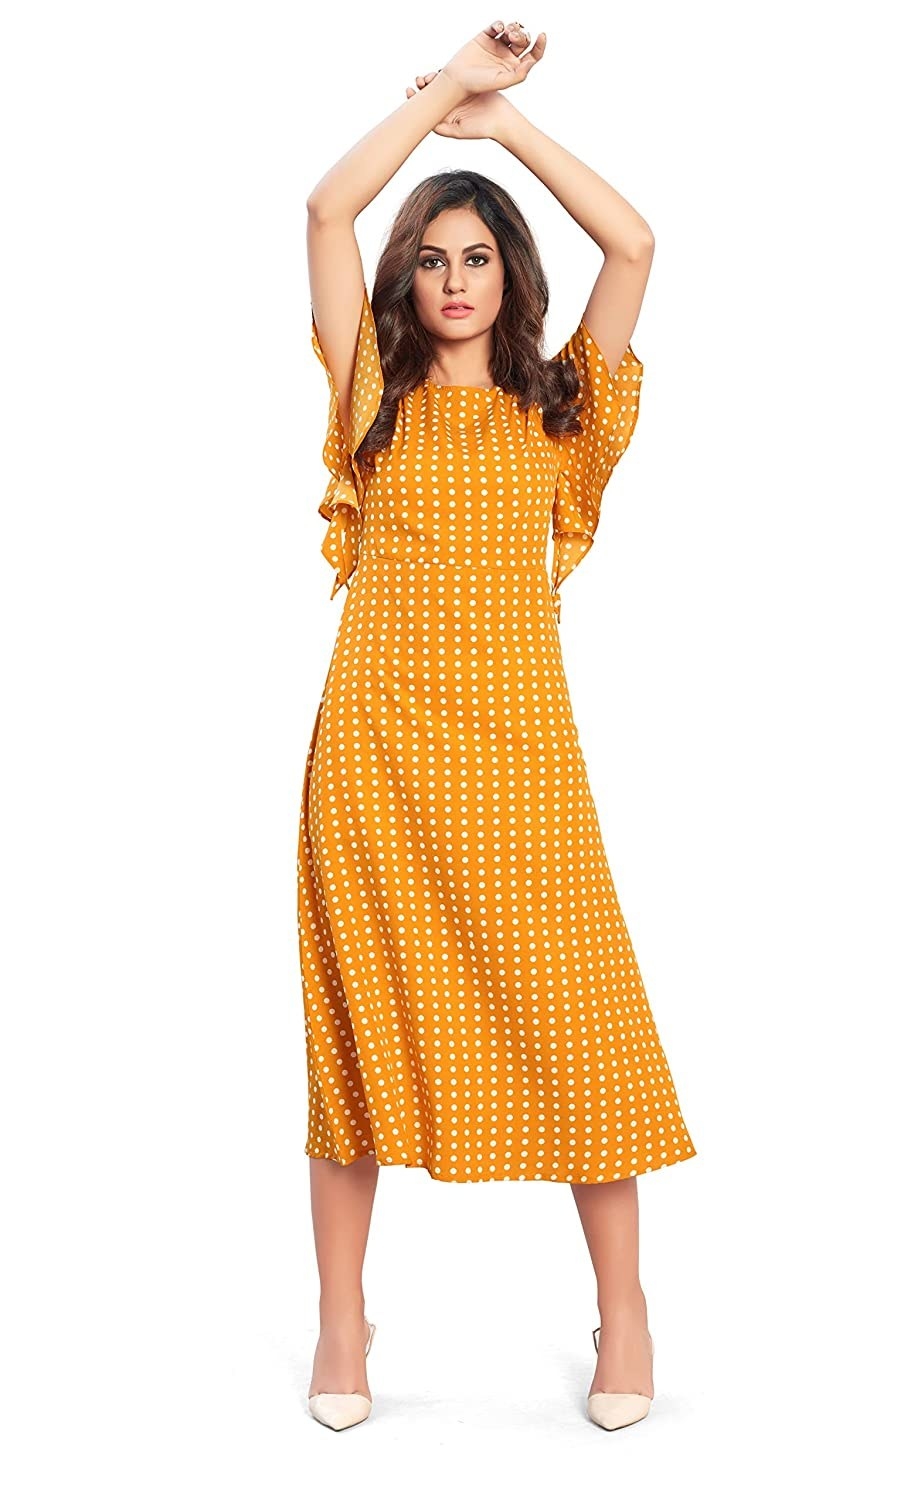 A woman wearing a yellow polka dot dress with heels